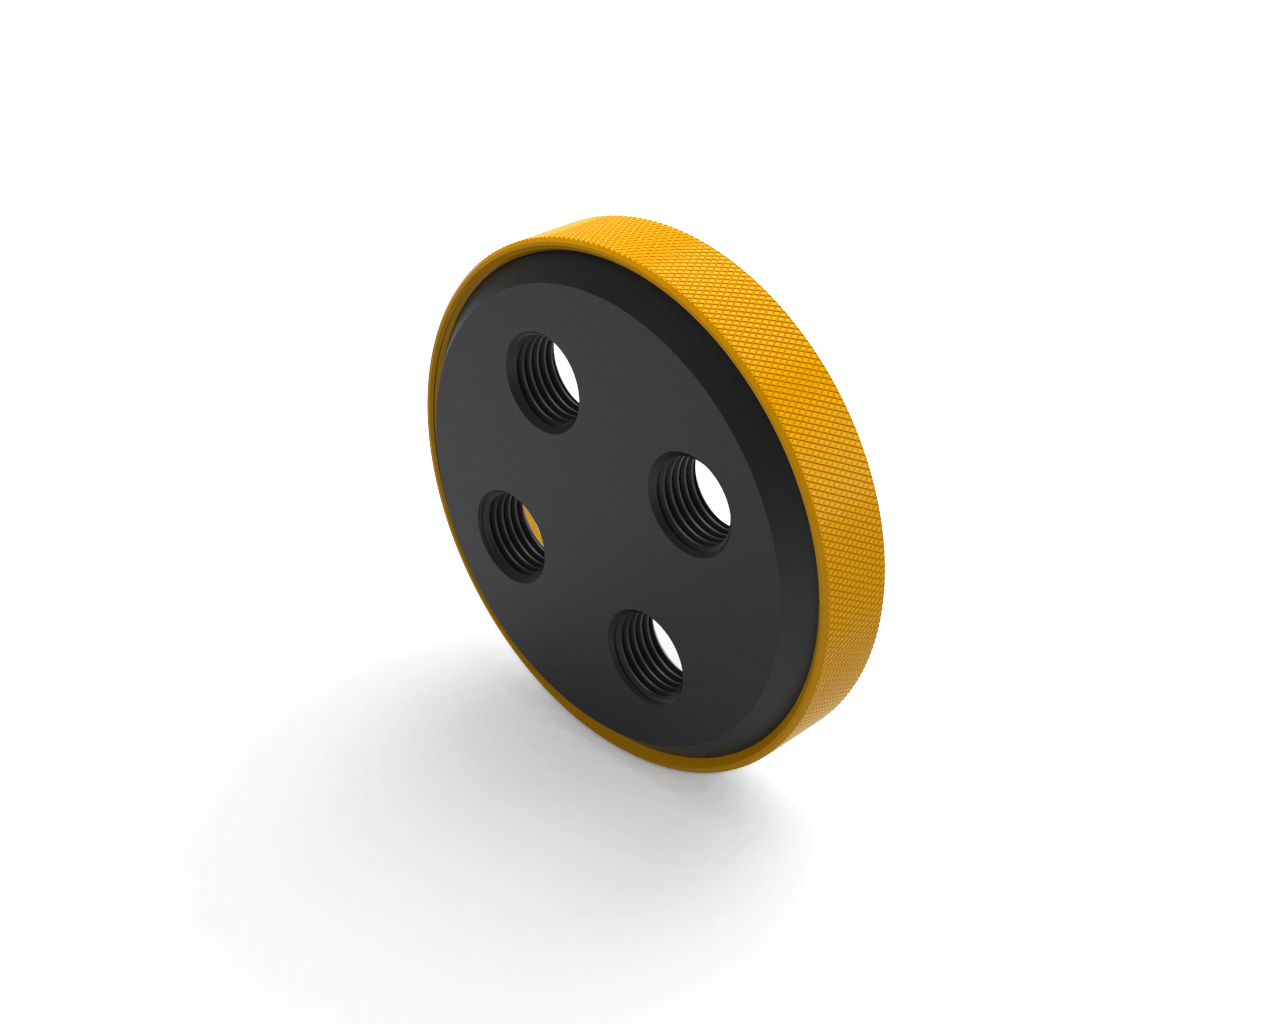 PrimoChill CTR Replacement SX Compression Ring - PrimoChill - KEEPING IT COOL Yellow